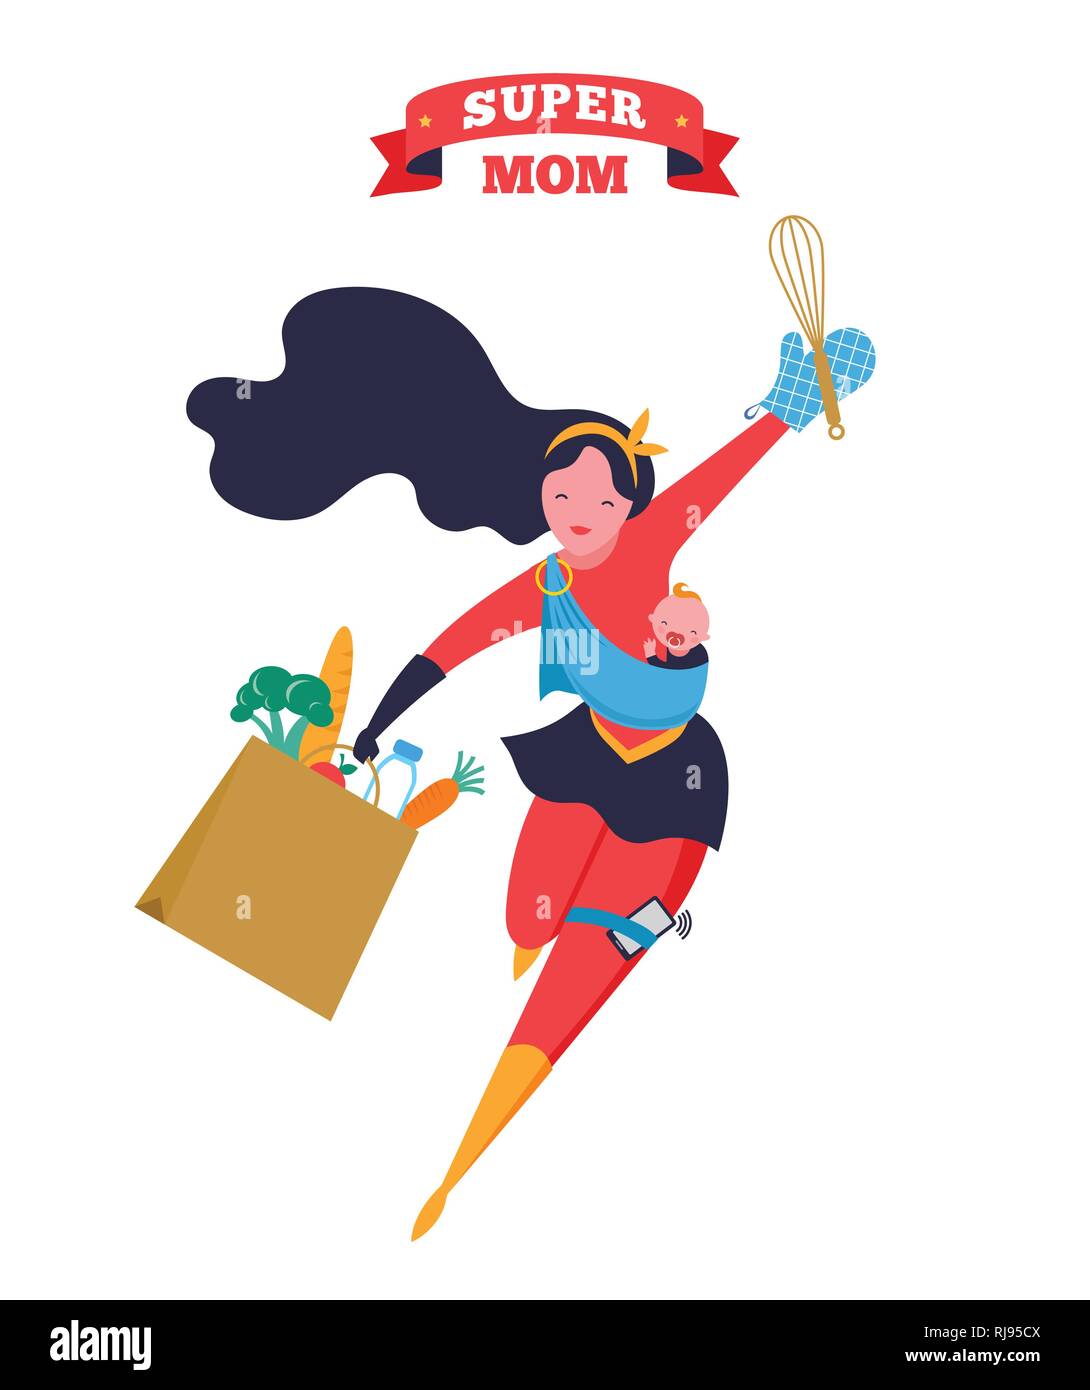 Super Mom. Flying superhero mother carrying a baby. Vector illustration Stock Vector